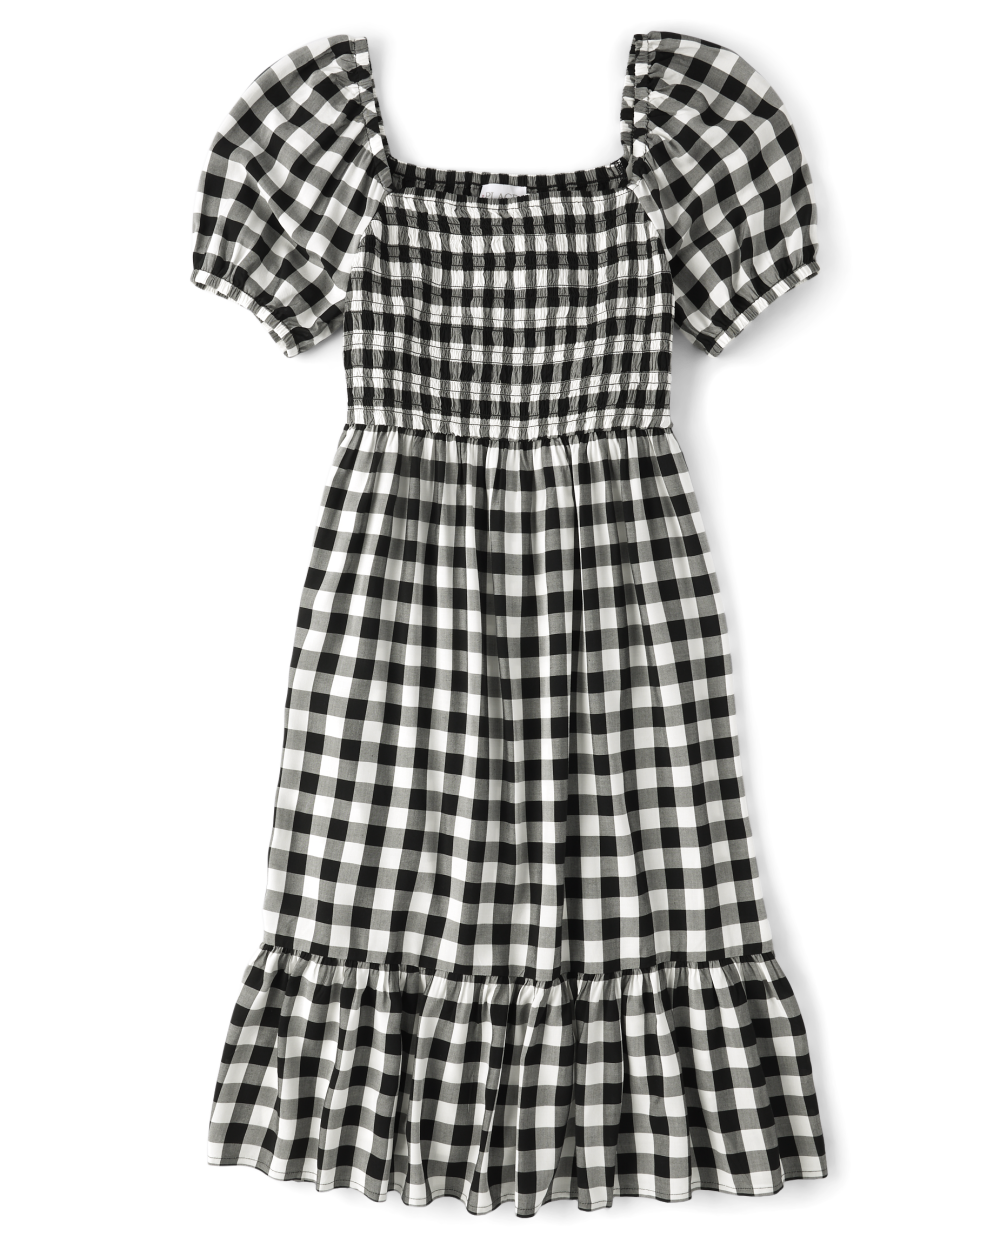 Smocked Square Neck Rayon Above the Knee Puff Sleeves Short Sleeves Sleeves Checkered Gingham Print Dress With Ruffles